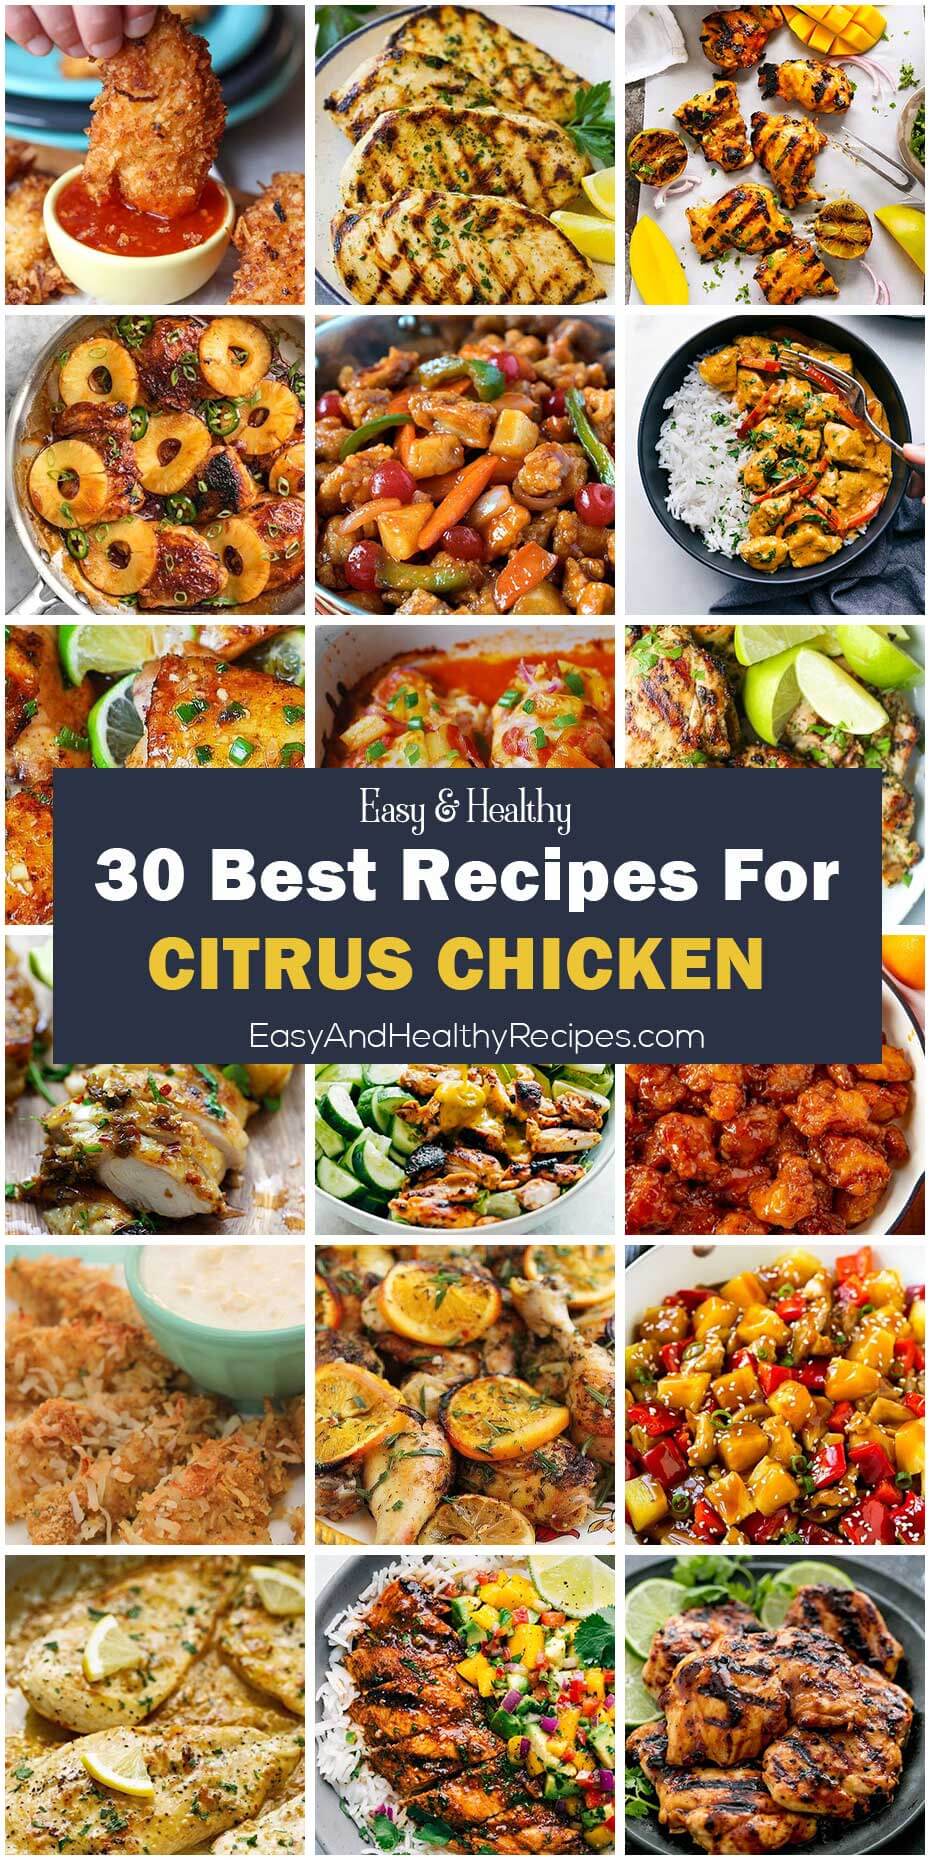 Top 30 Citrus Chicken Dishes You Should Taste